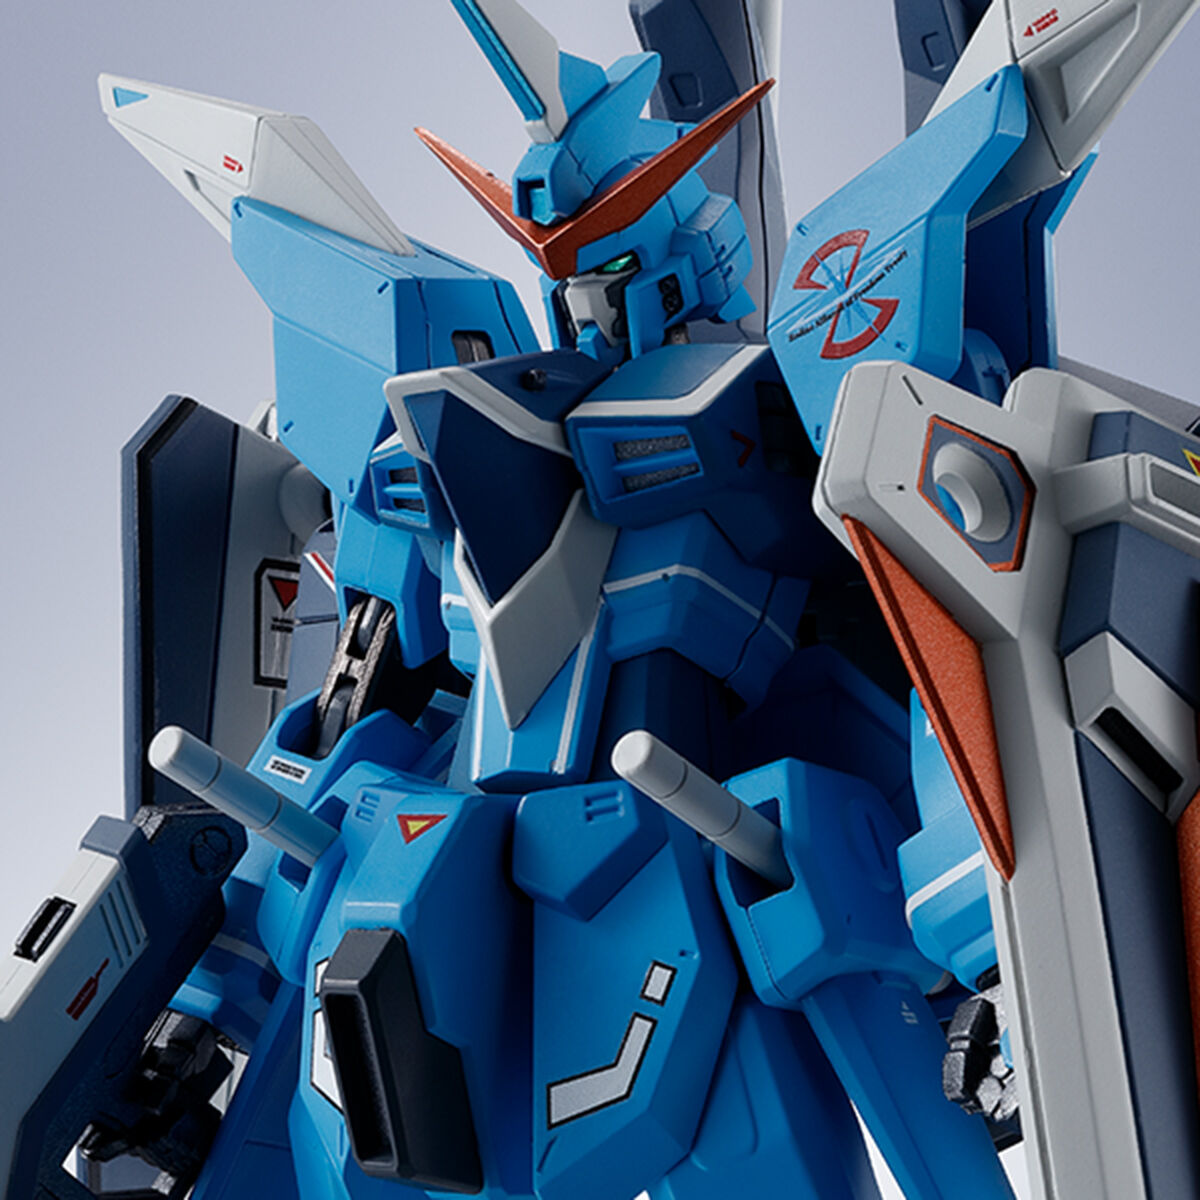 JUSTICE GUNDAM REAL-TYPE COLOR Ver. SIDE MS SEED TAMASHII NATIONS Figure BANDAI